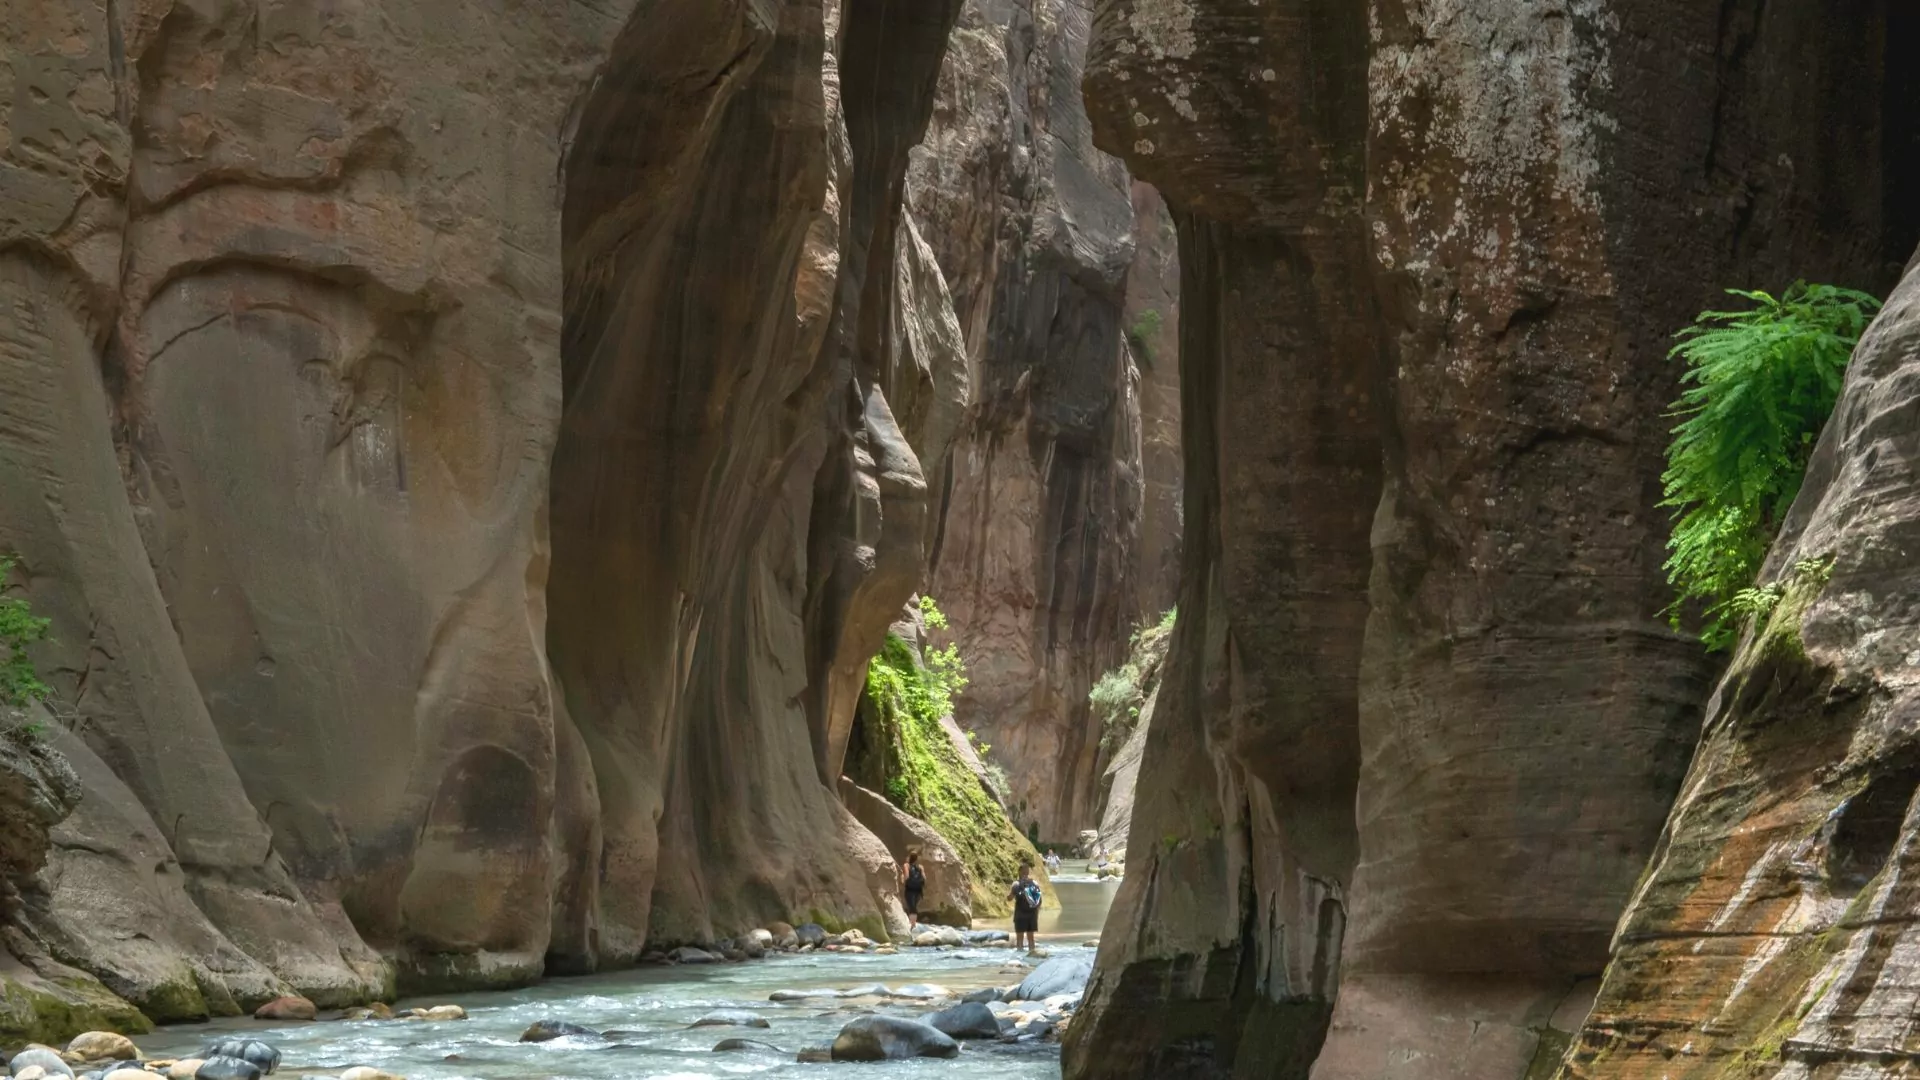 The Virgin River slows through the towering canyon walls of the Zion Narrows, at Utah's Zion National Park